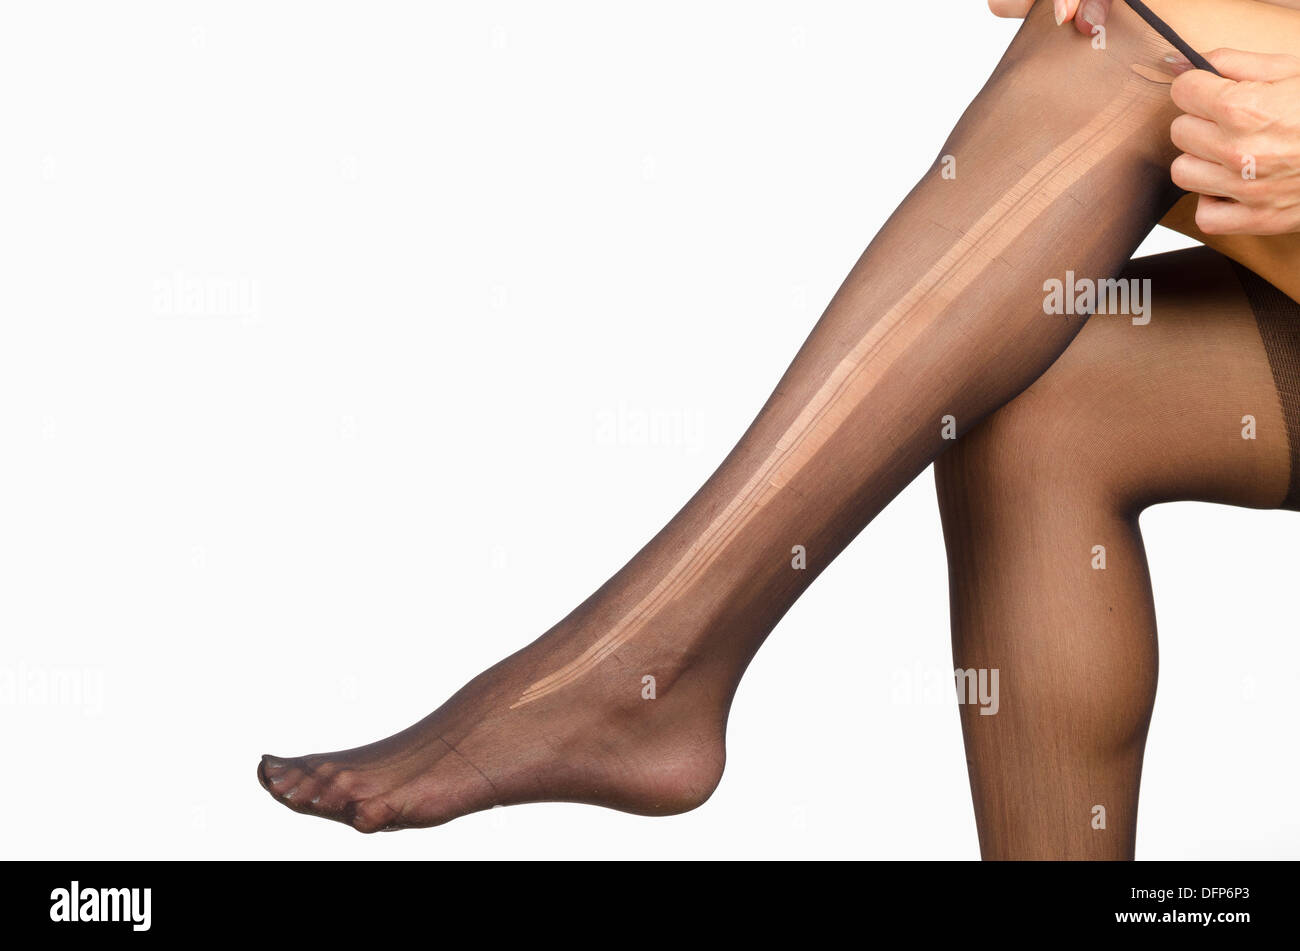 Female legs with a ripped pantyhose on Stock Photo - Alamy